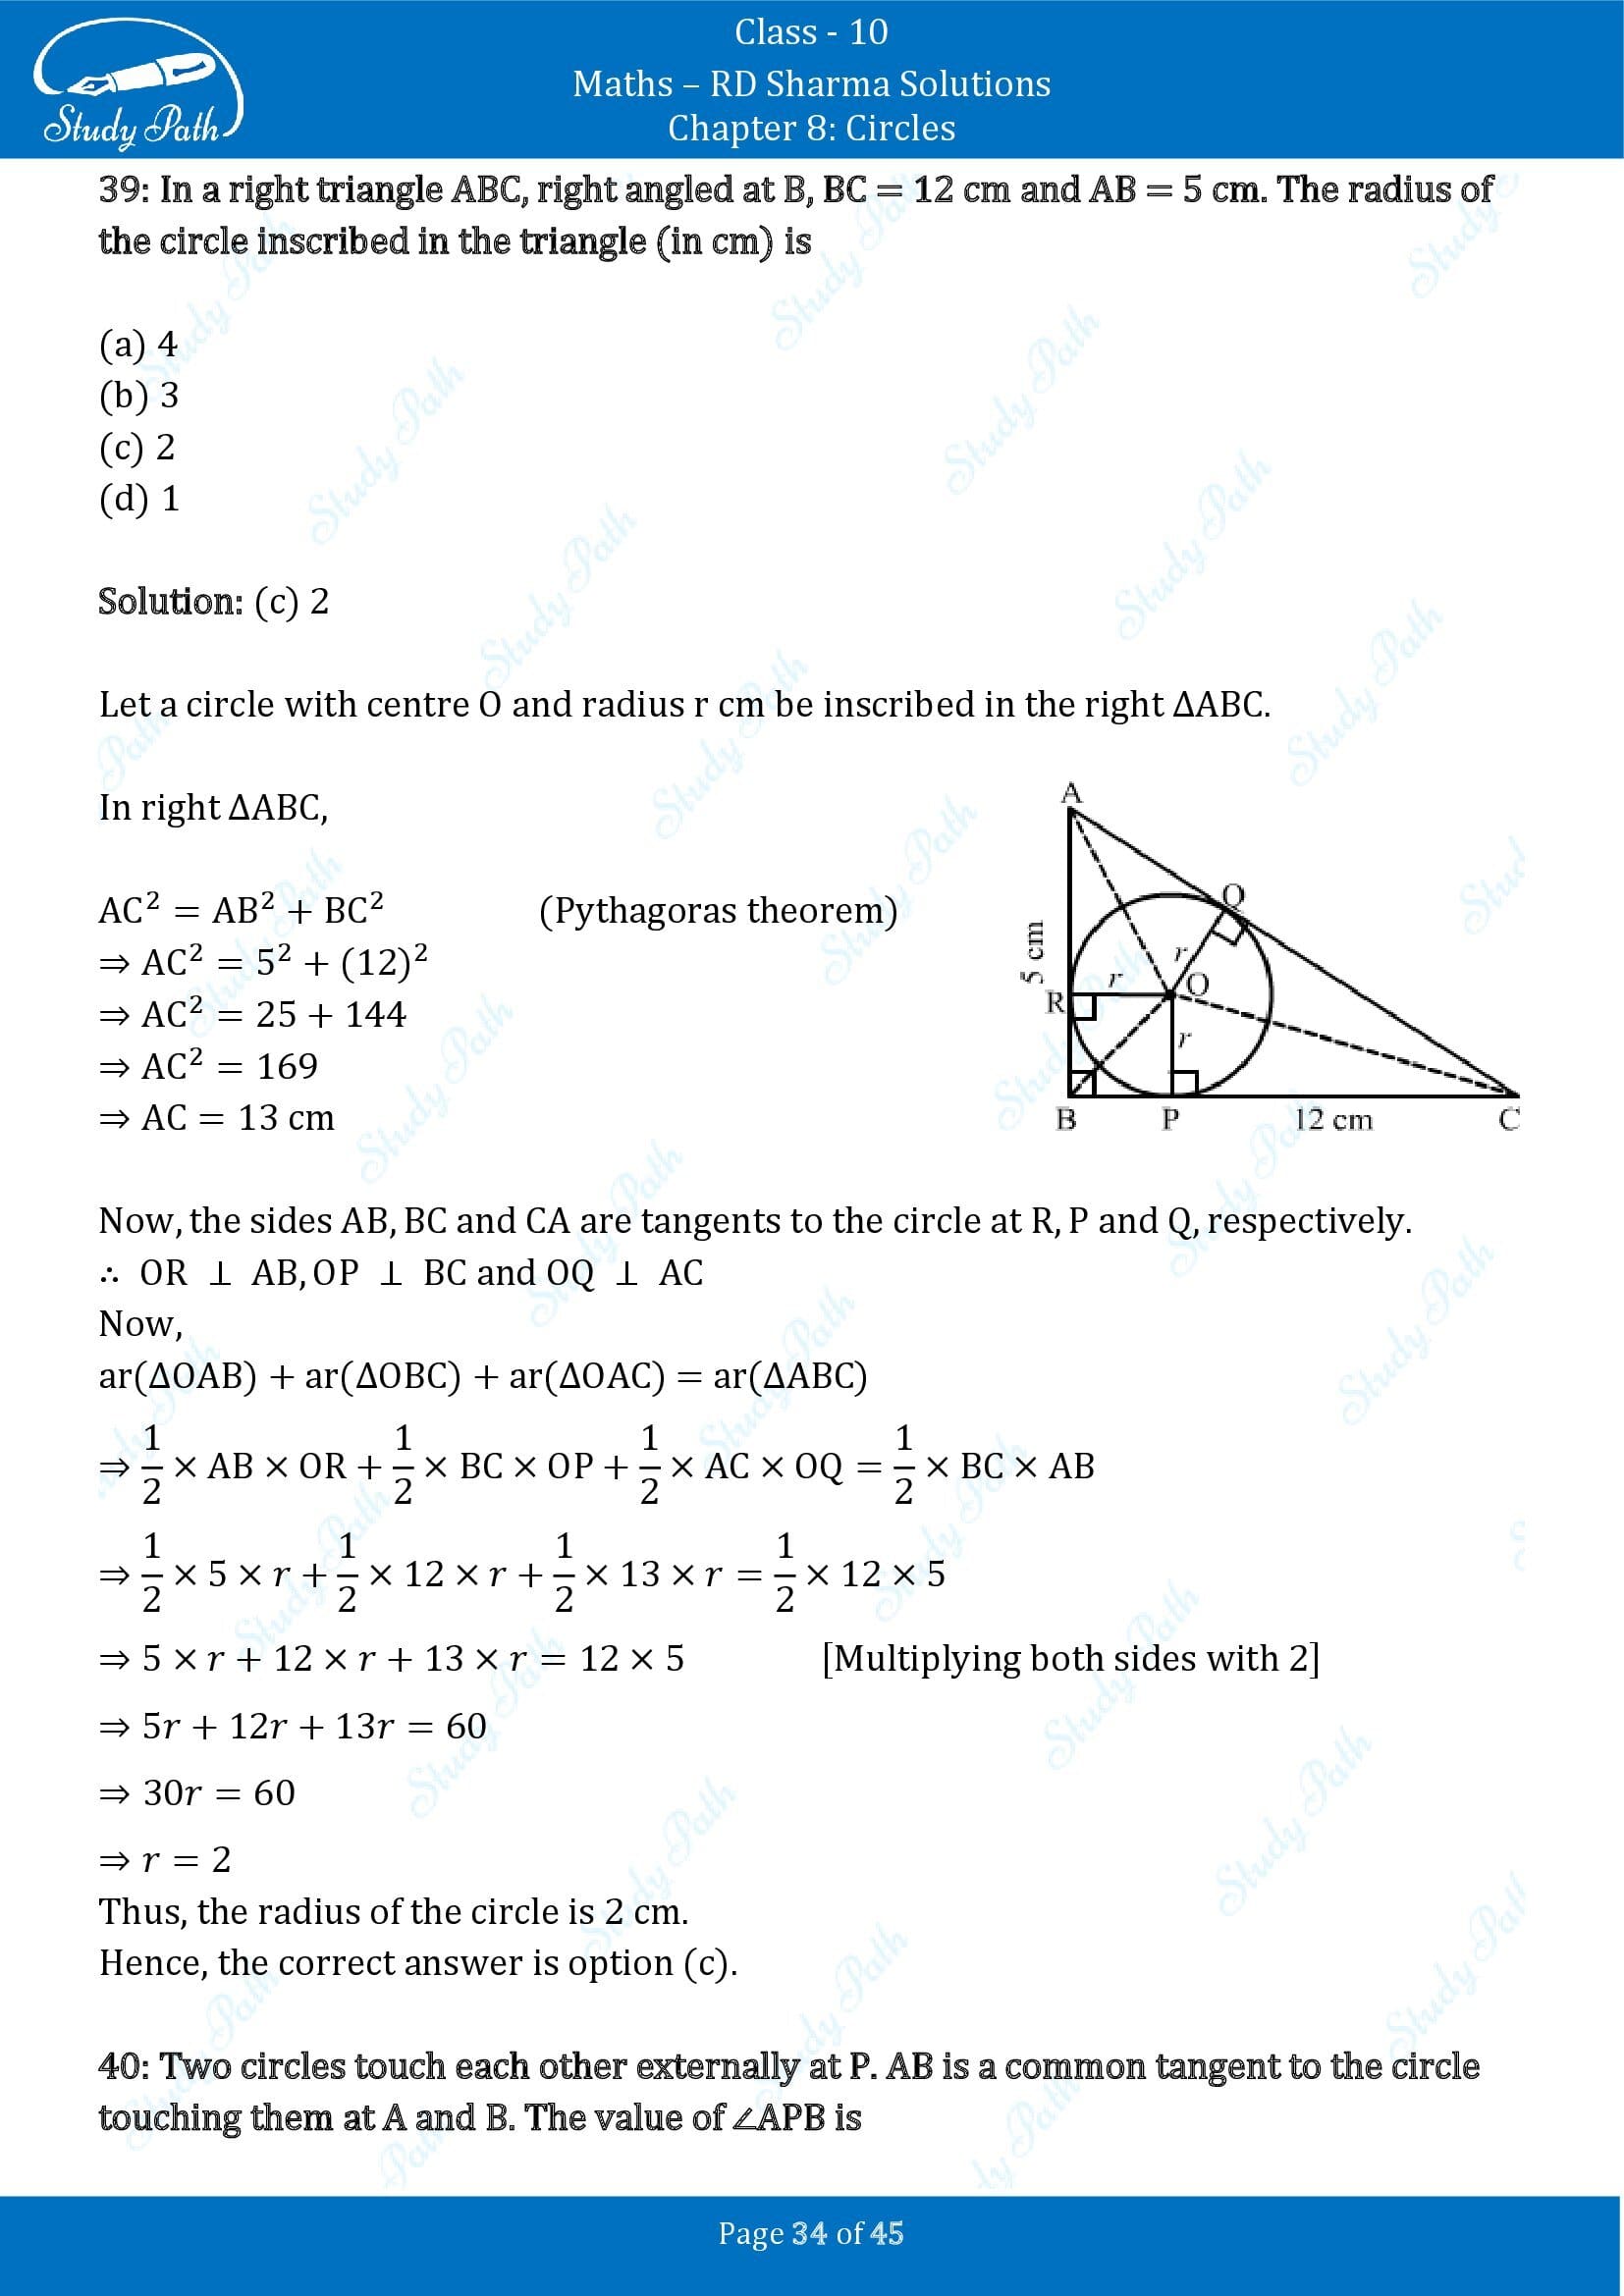 RD Sharma Solutions Class 10 Chapter 8 Circles Multiple Choice Questions MCQs 00034